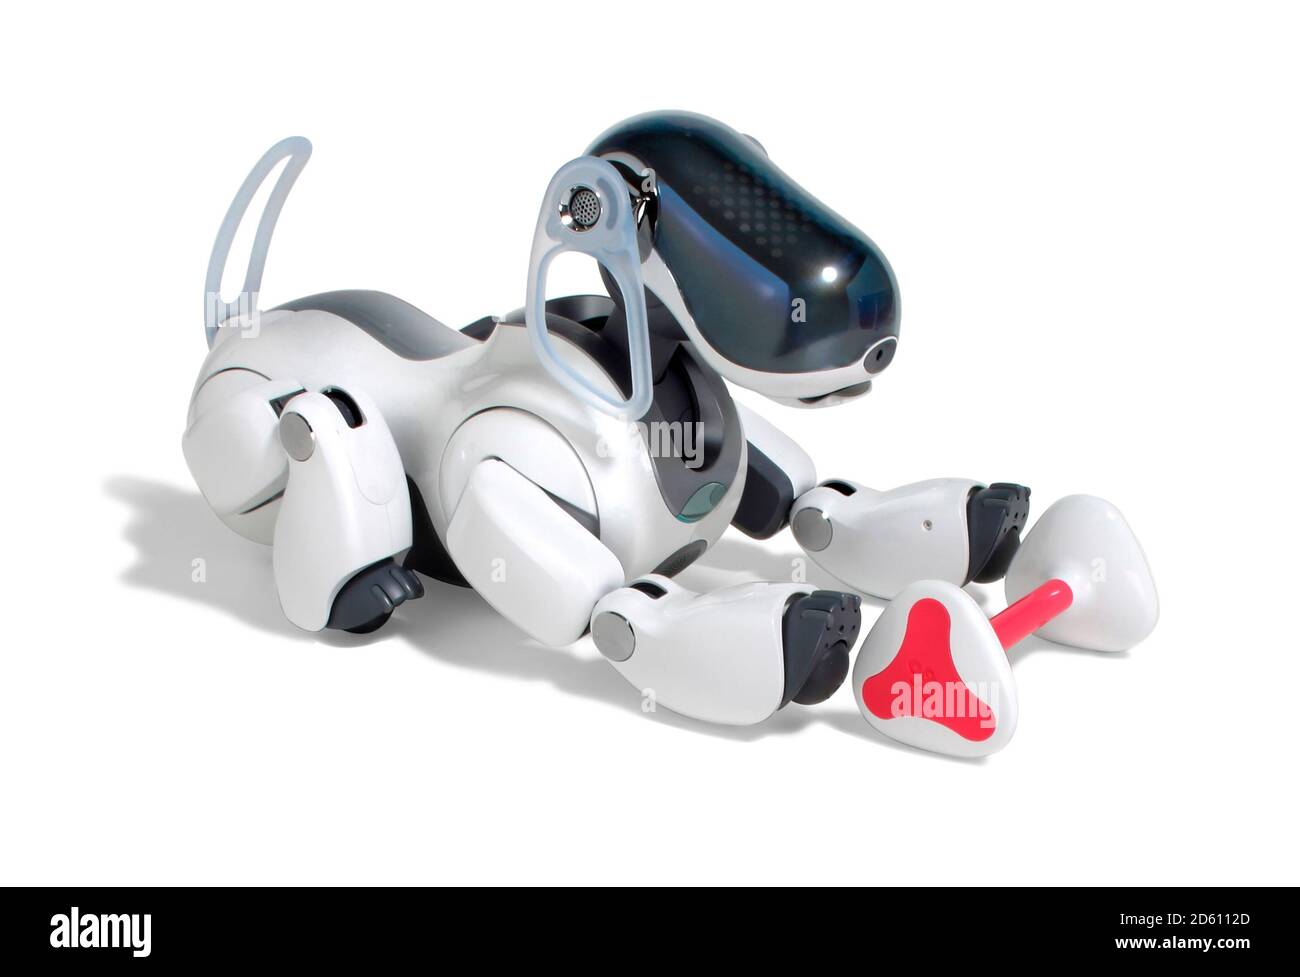 Sony aibo robotic pet dog in black and white with toy dog bone photographed on a white background. Stock Photo